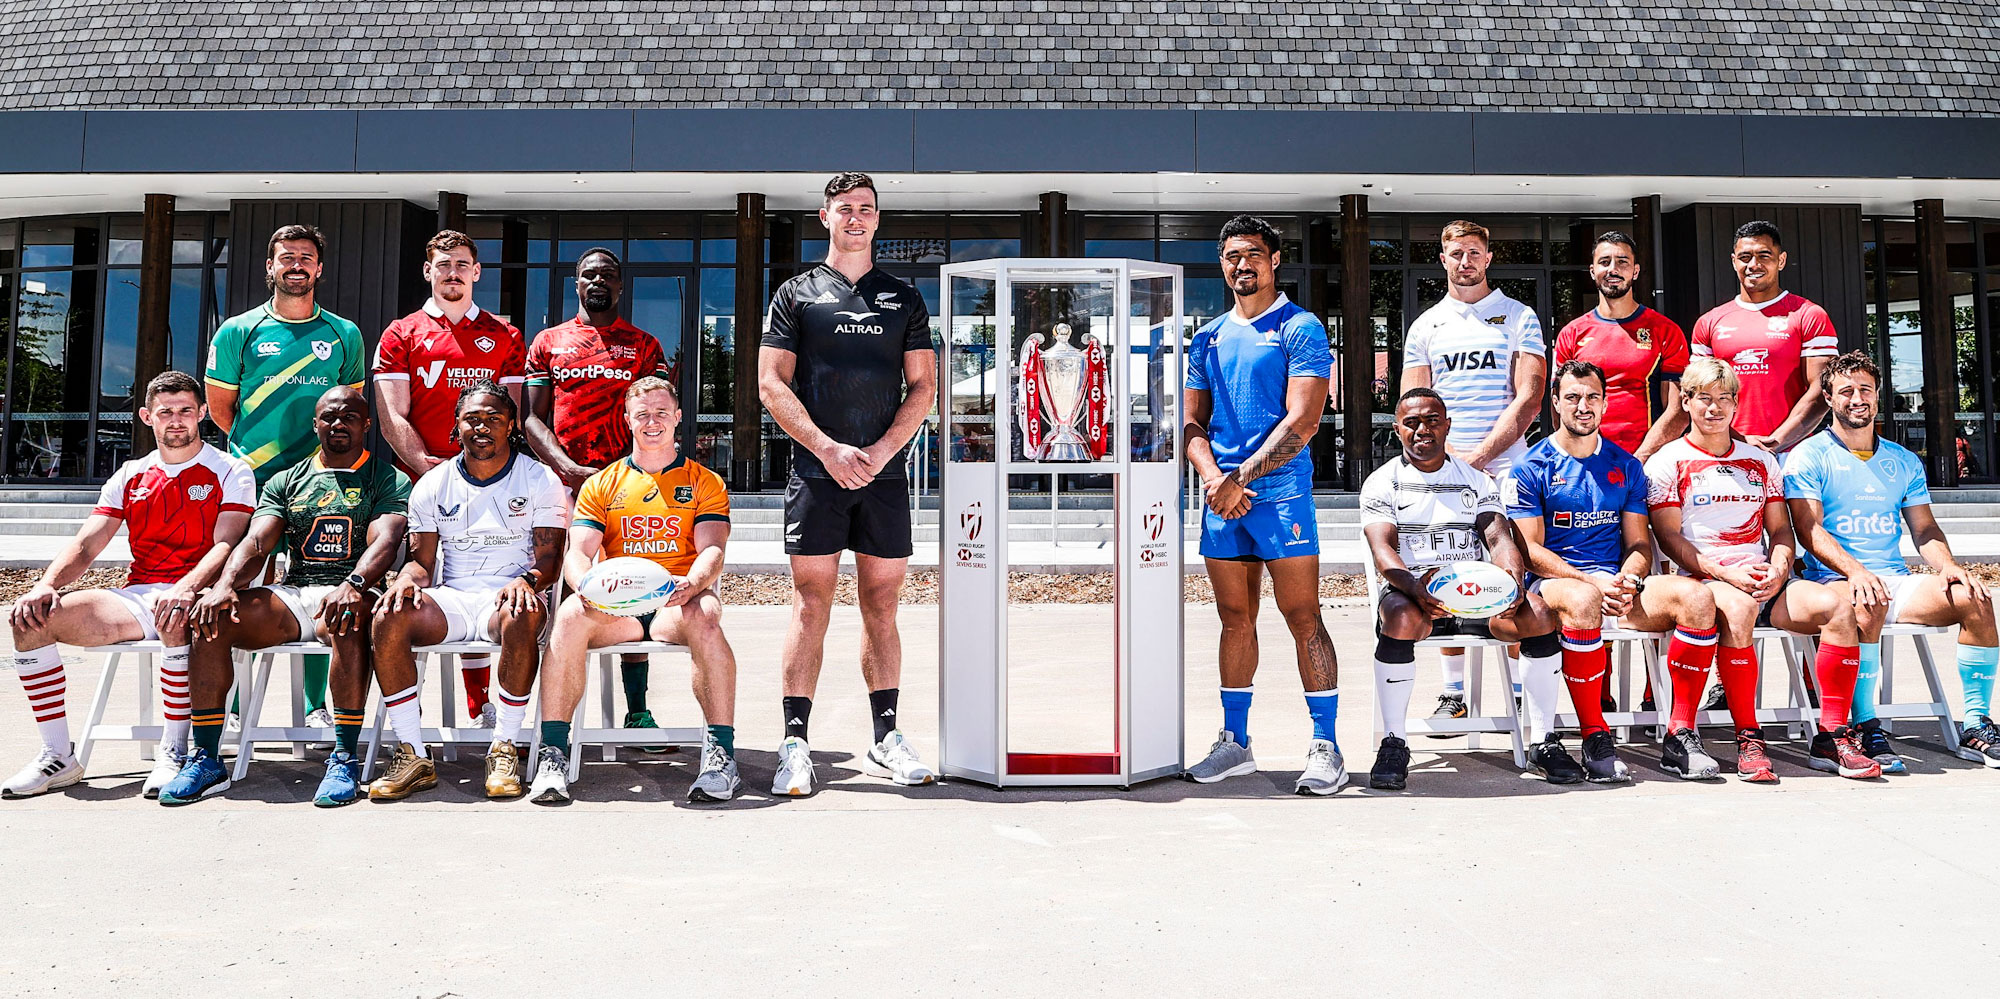 The captains of the men's teams in action at the HSBC New Zealand Sevens in Hamilton this weekend.